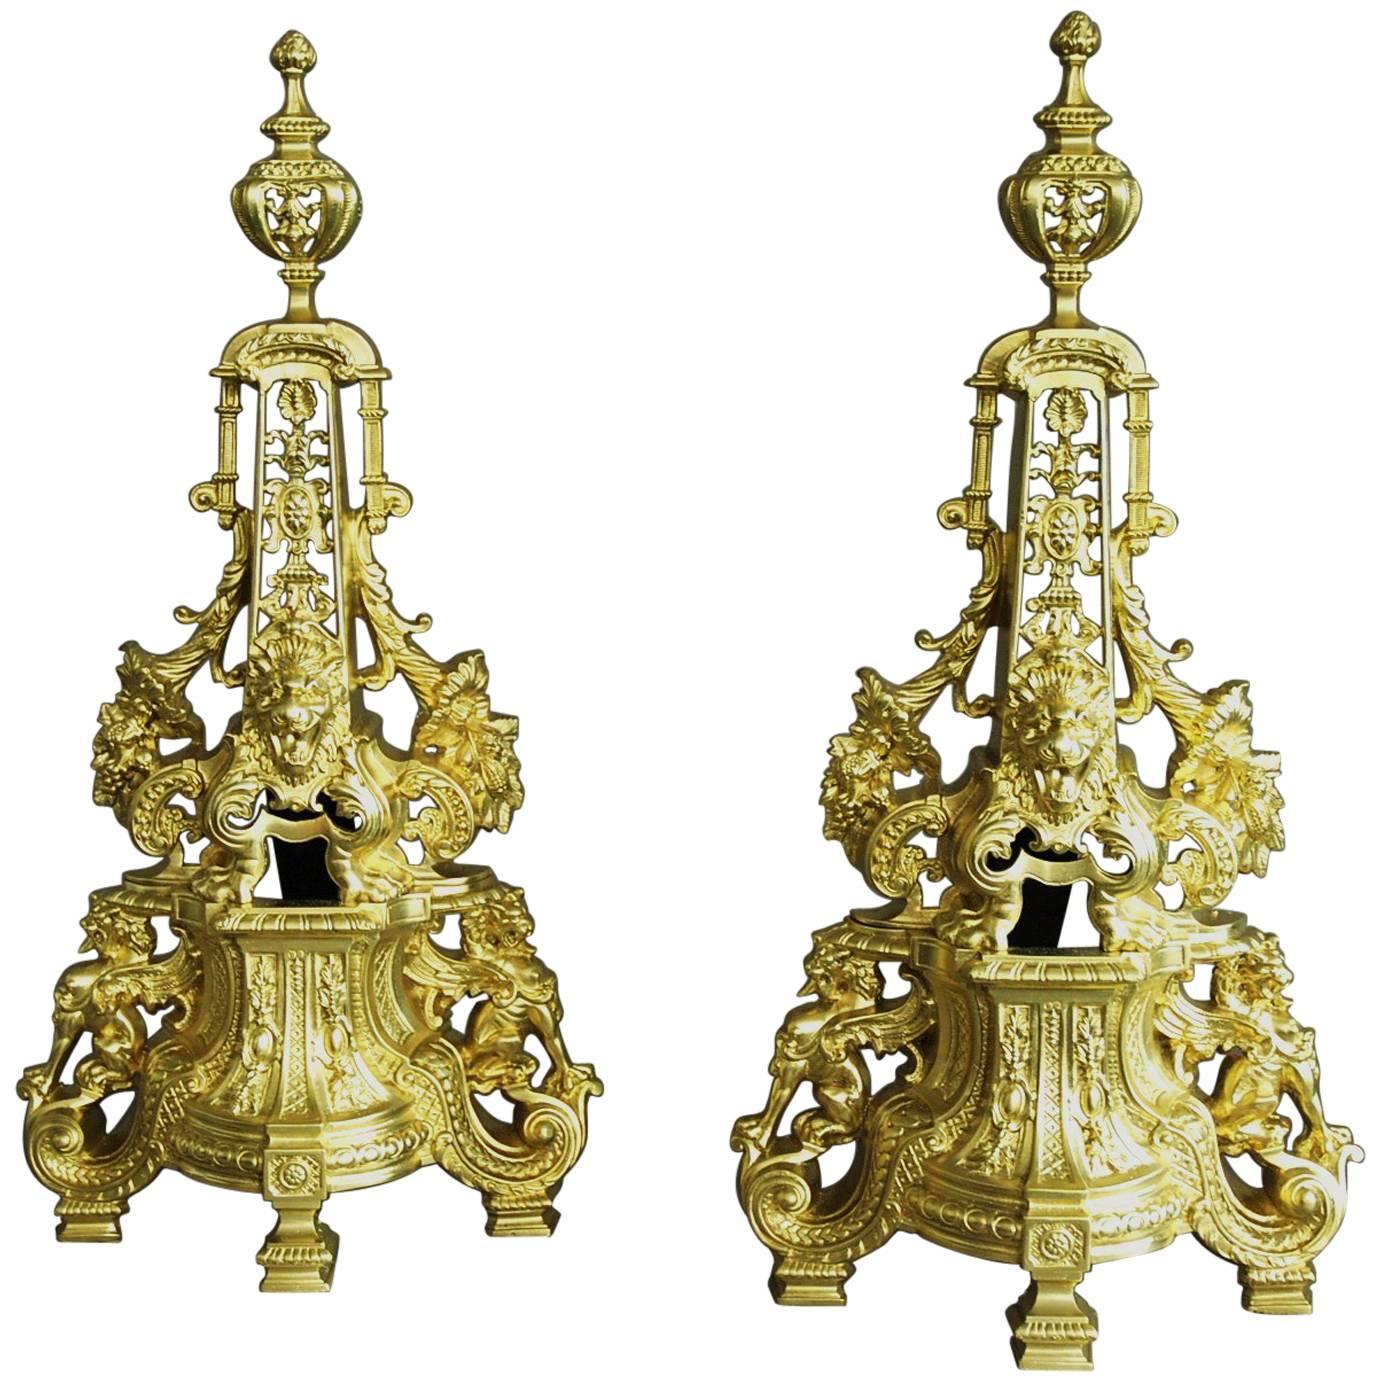 Extremely Large Pair of French 19th Century Chenets or Fire Dogs